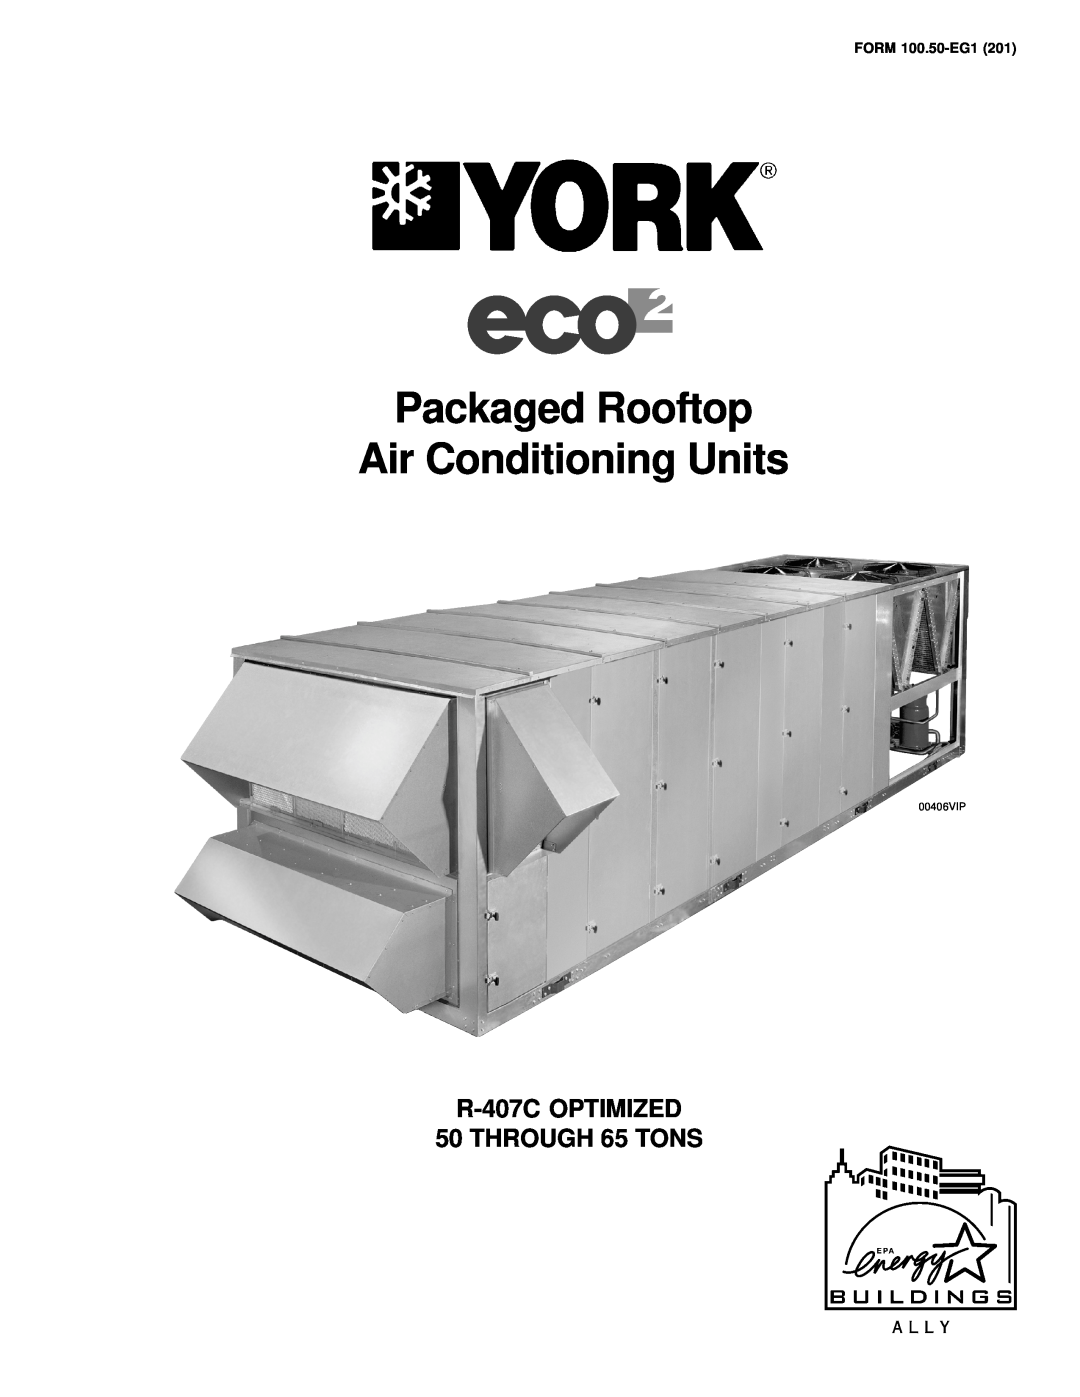 York manual R-407C OPTIMIZED 50 THROUGH 65 TONS, Packaged Rooftop Air Conditioning Units 